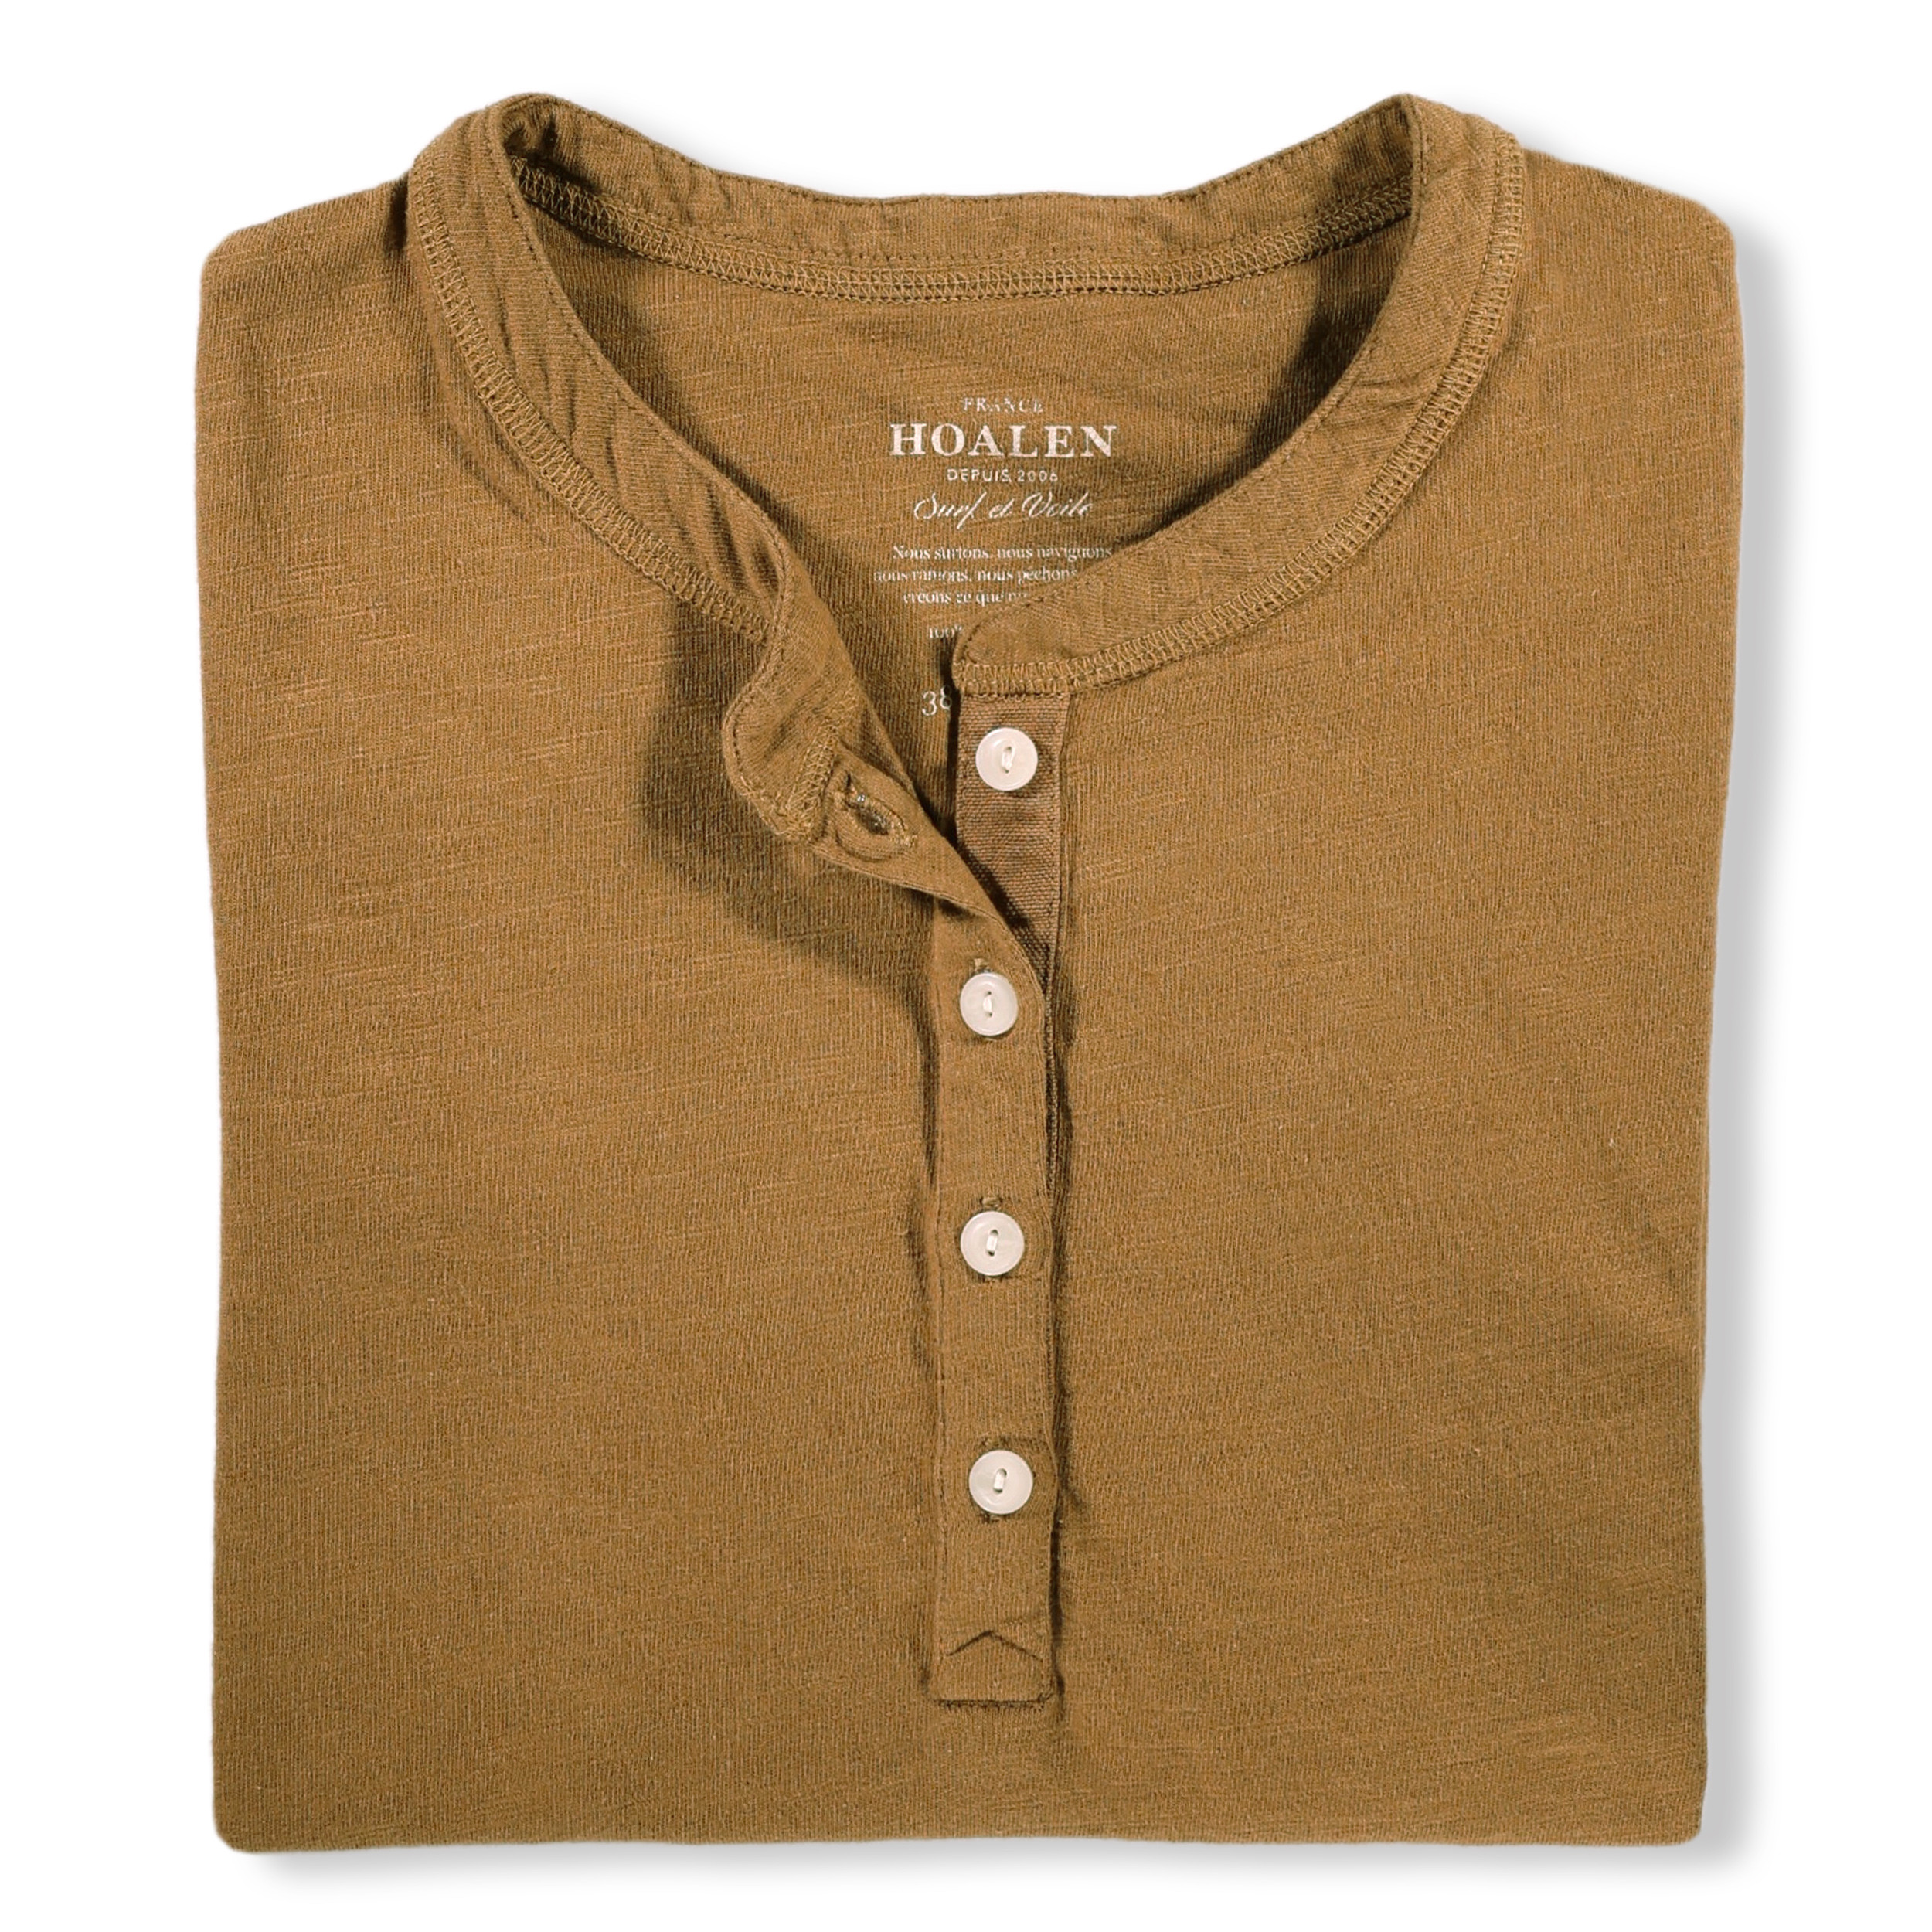 Heavy buttoned tee